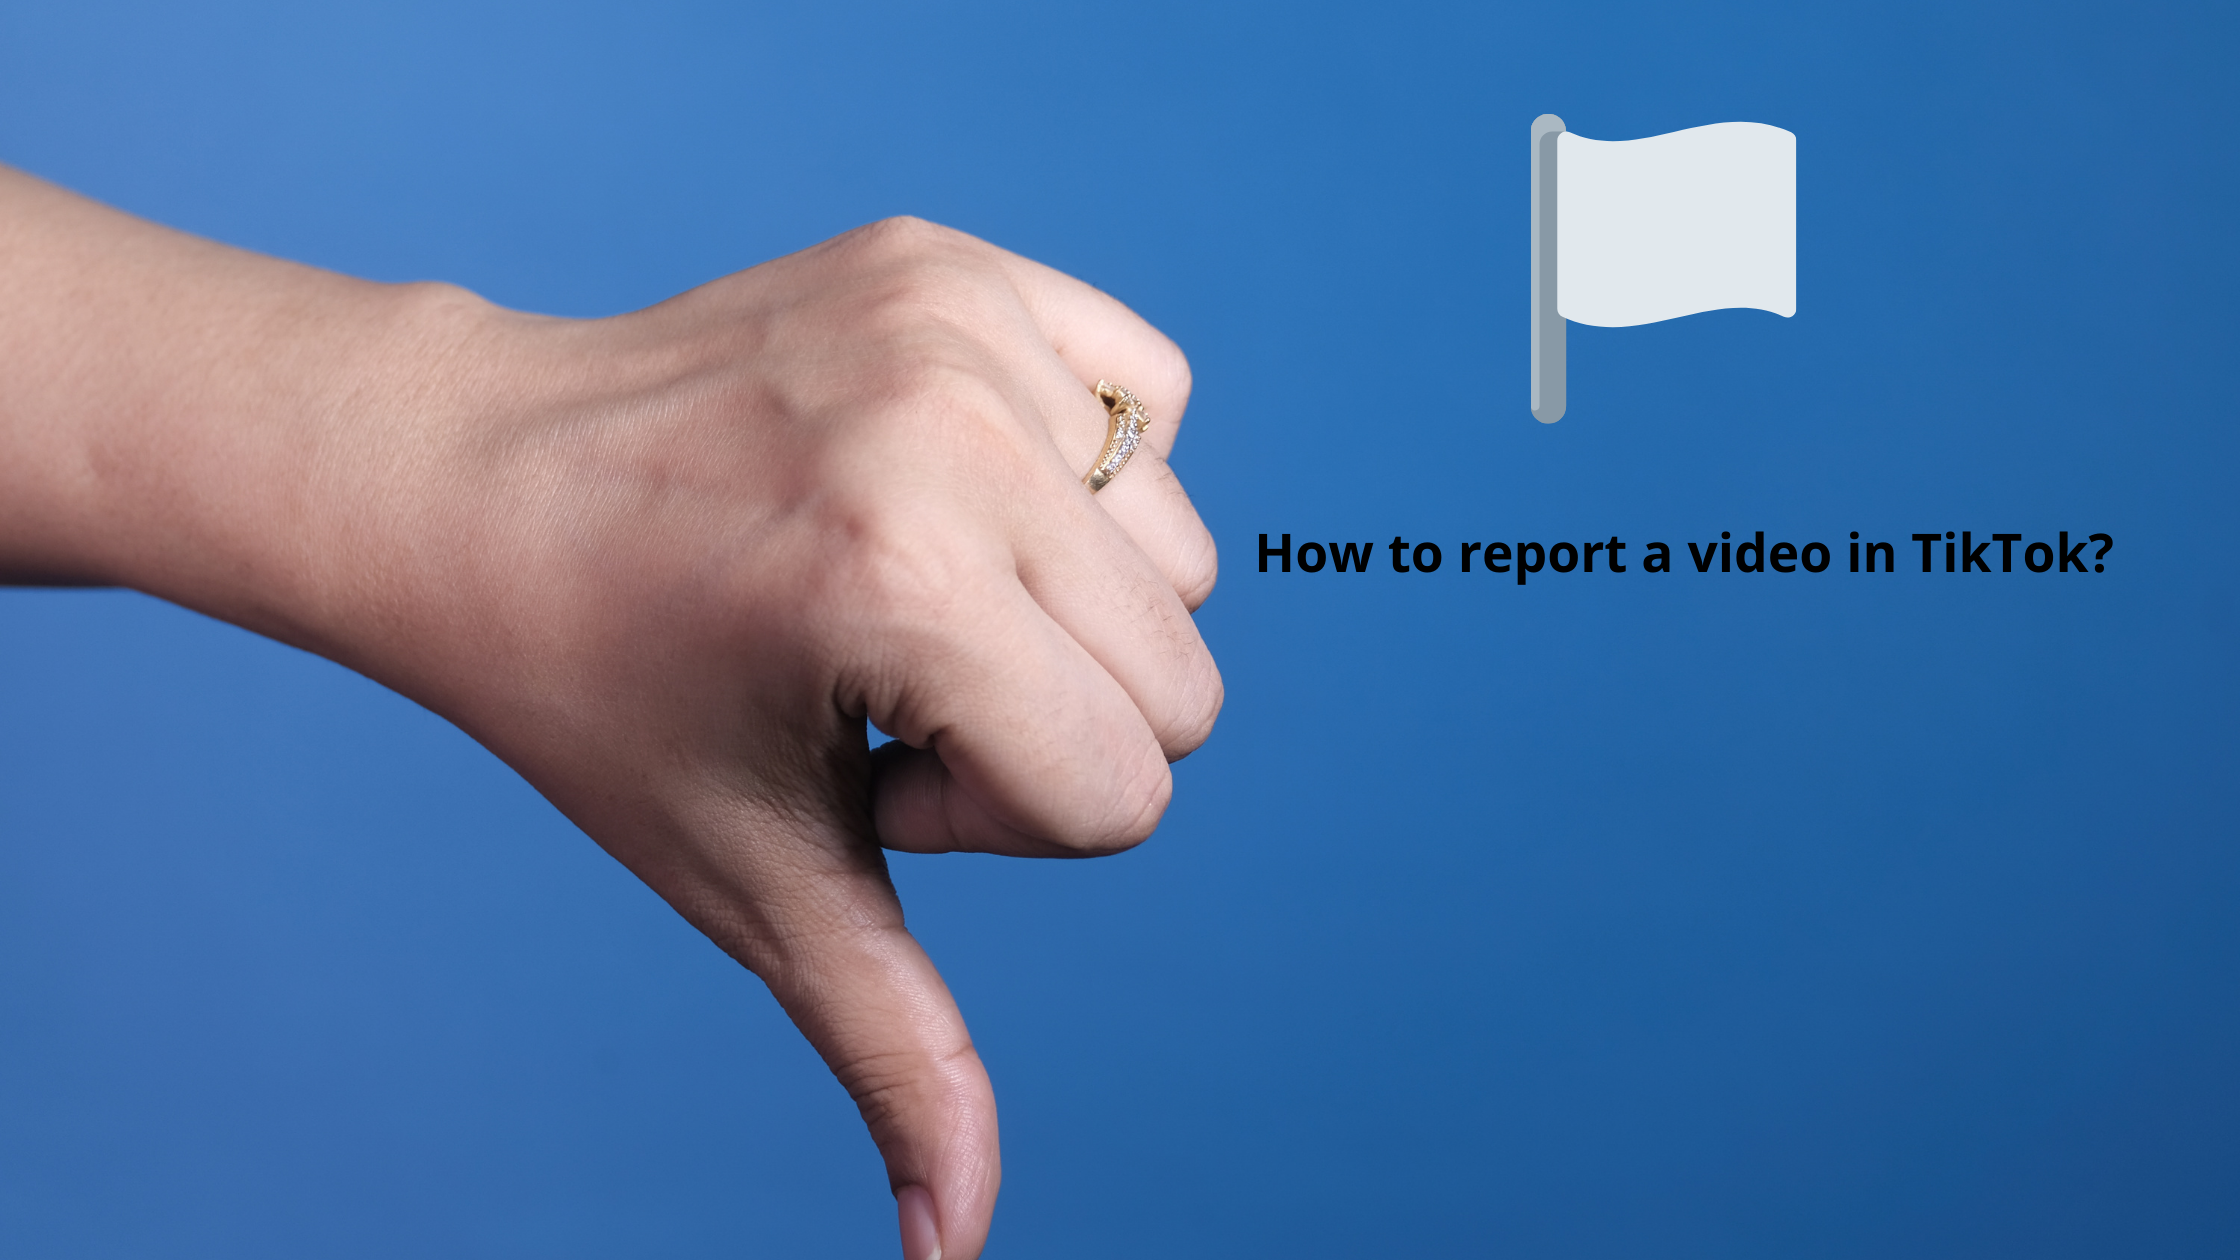 How to report a video in TikTok?